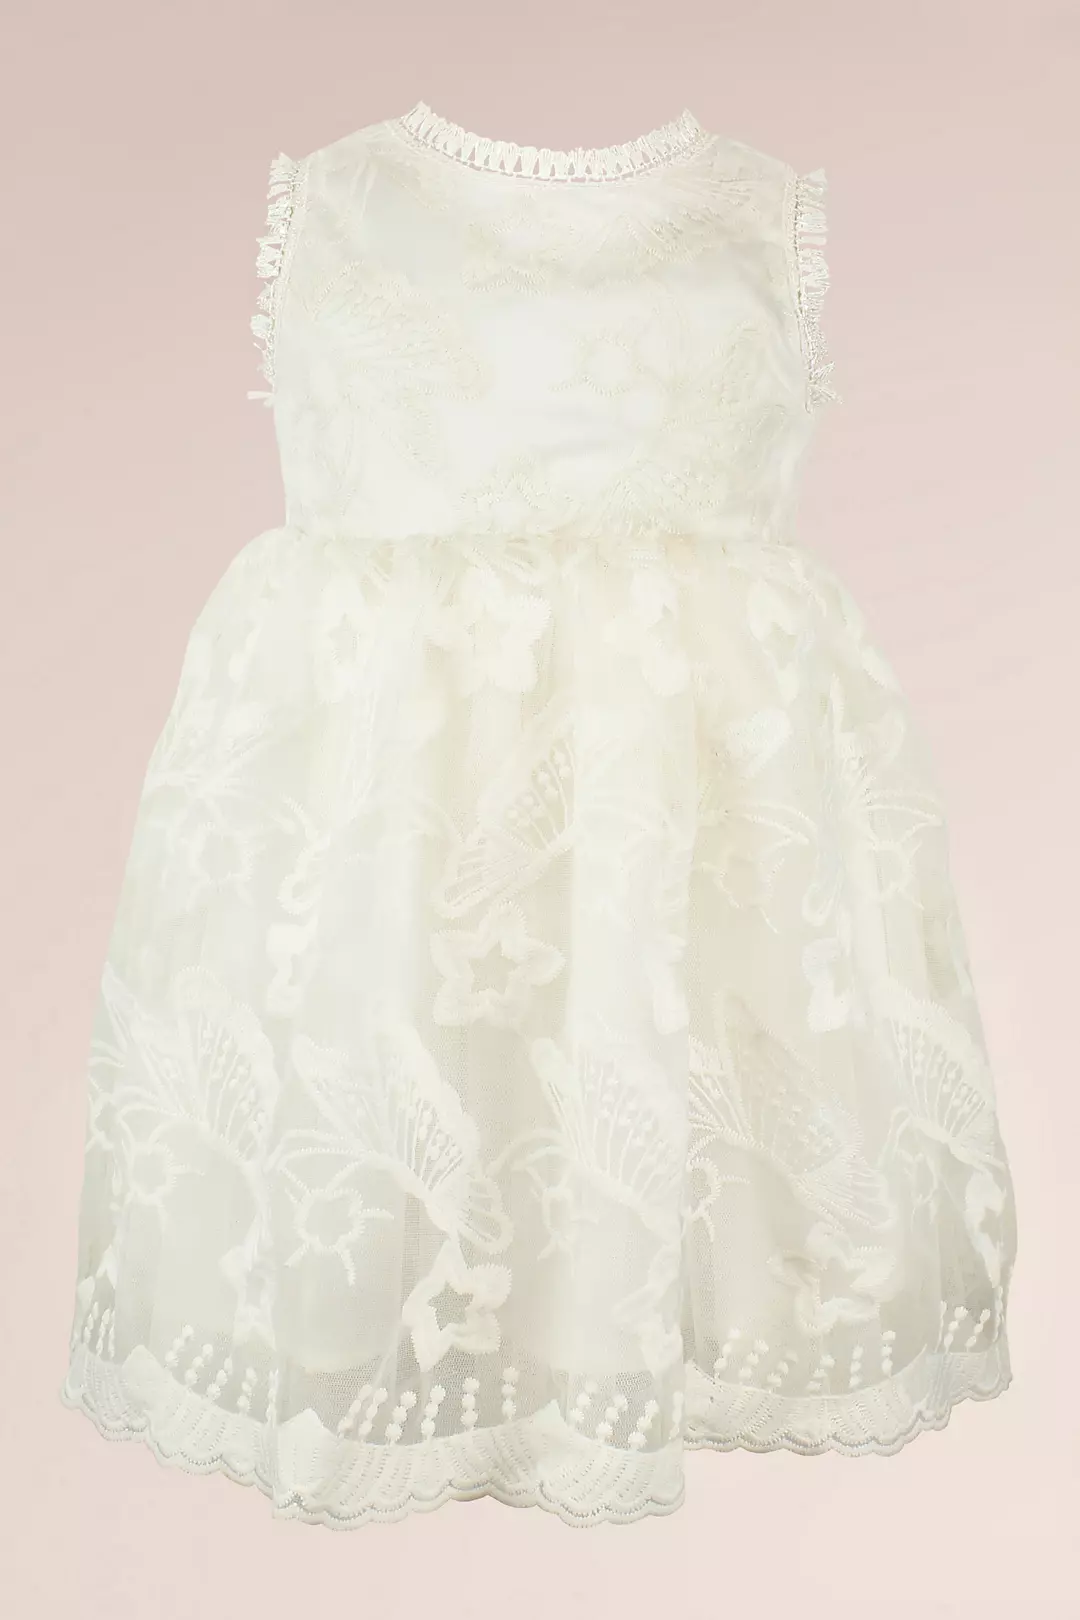 Embroidered Butterfly and Star Flower Girl Dress Image